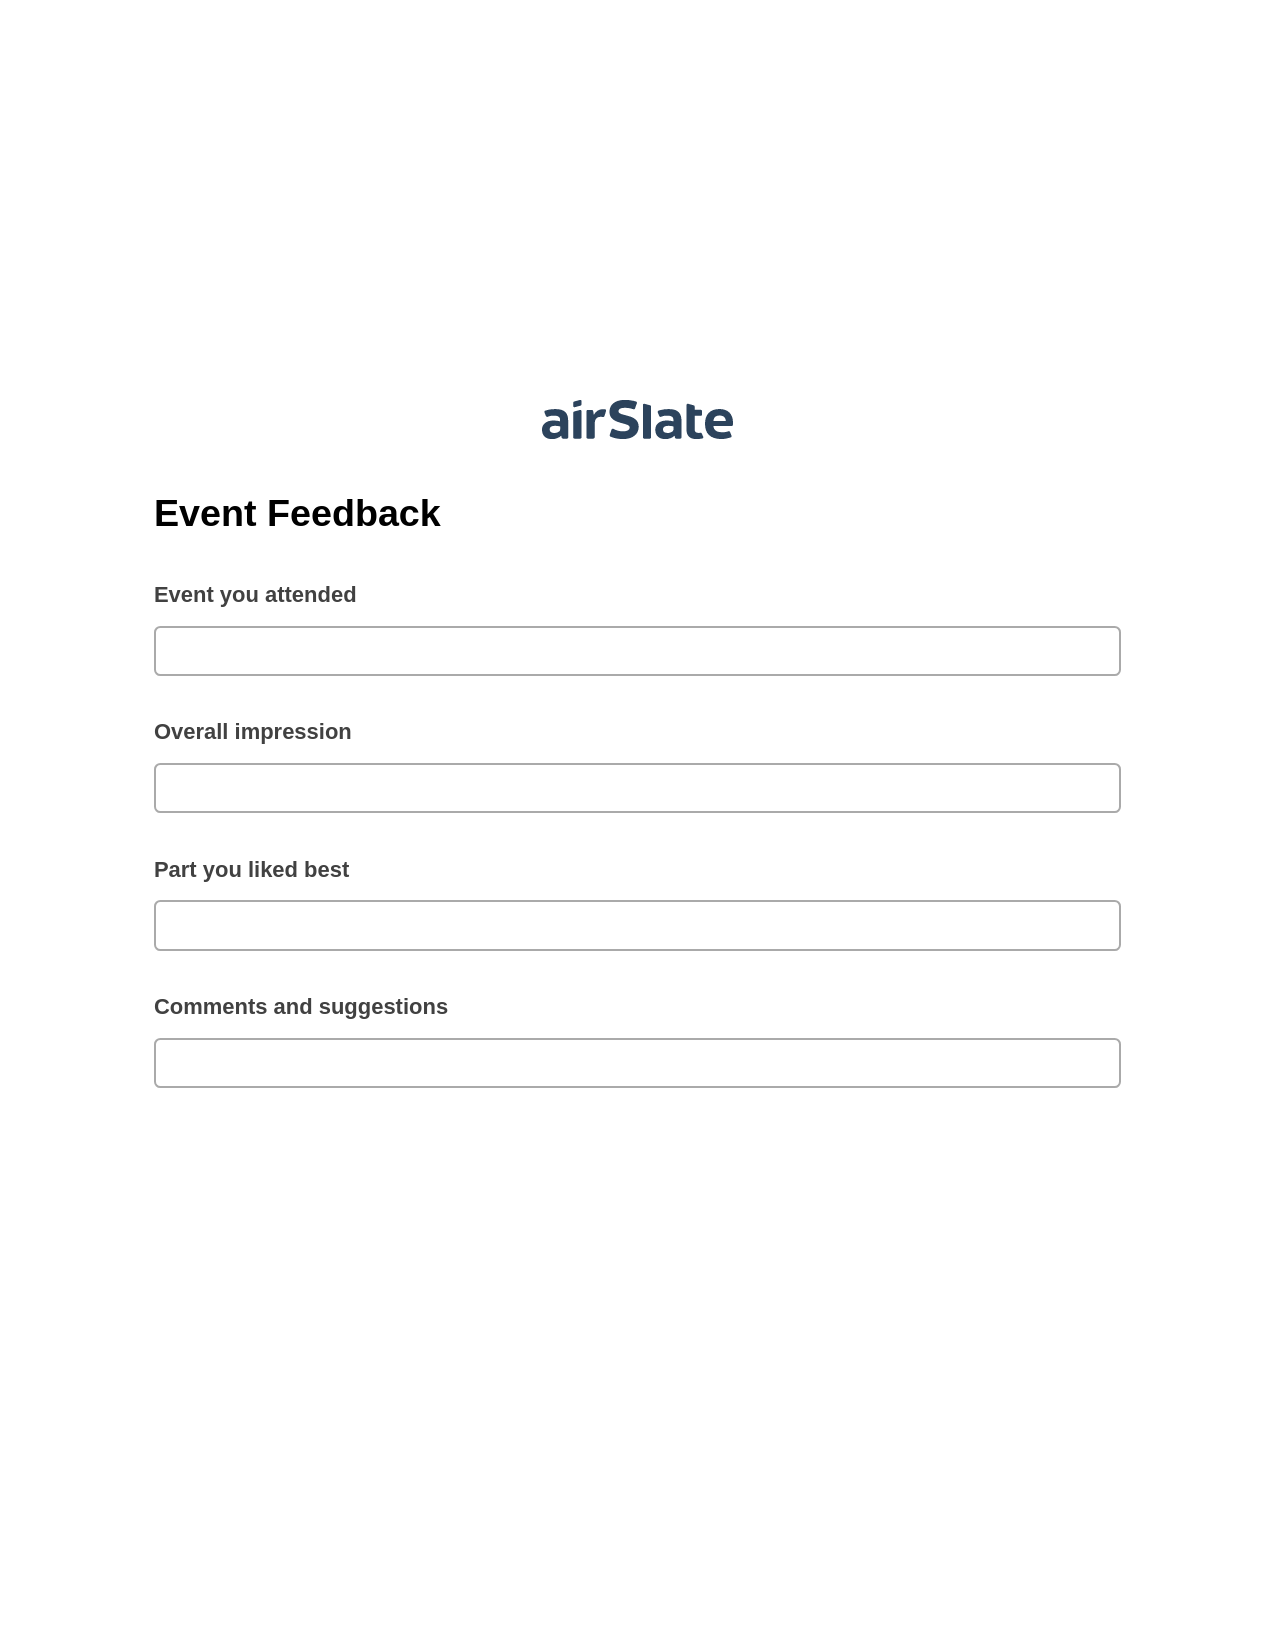 Event Feedback Pre-fill from Salesforce Record Bot, Update MS Dynamics 365 Records Bot, Export to Excel 365 Bot